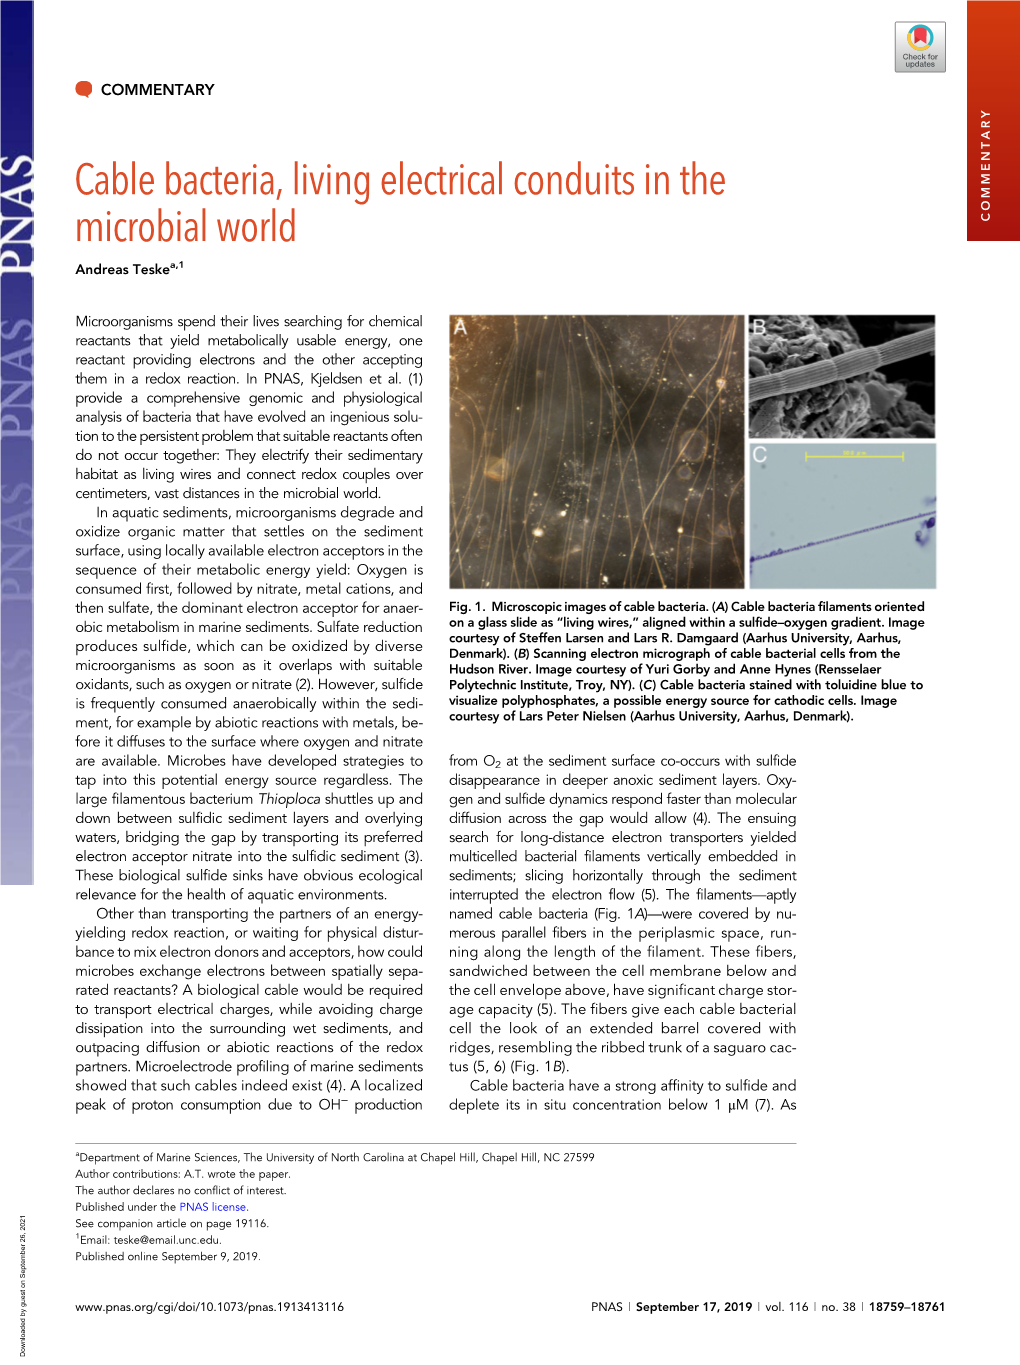 Cable Bacteria, Living Electrical Conduits in the Microbial World COMMENTARY Andreas Teskea,1